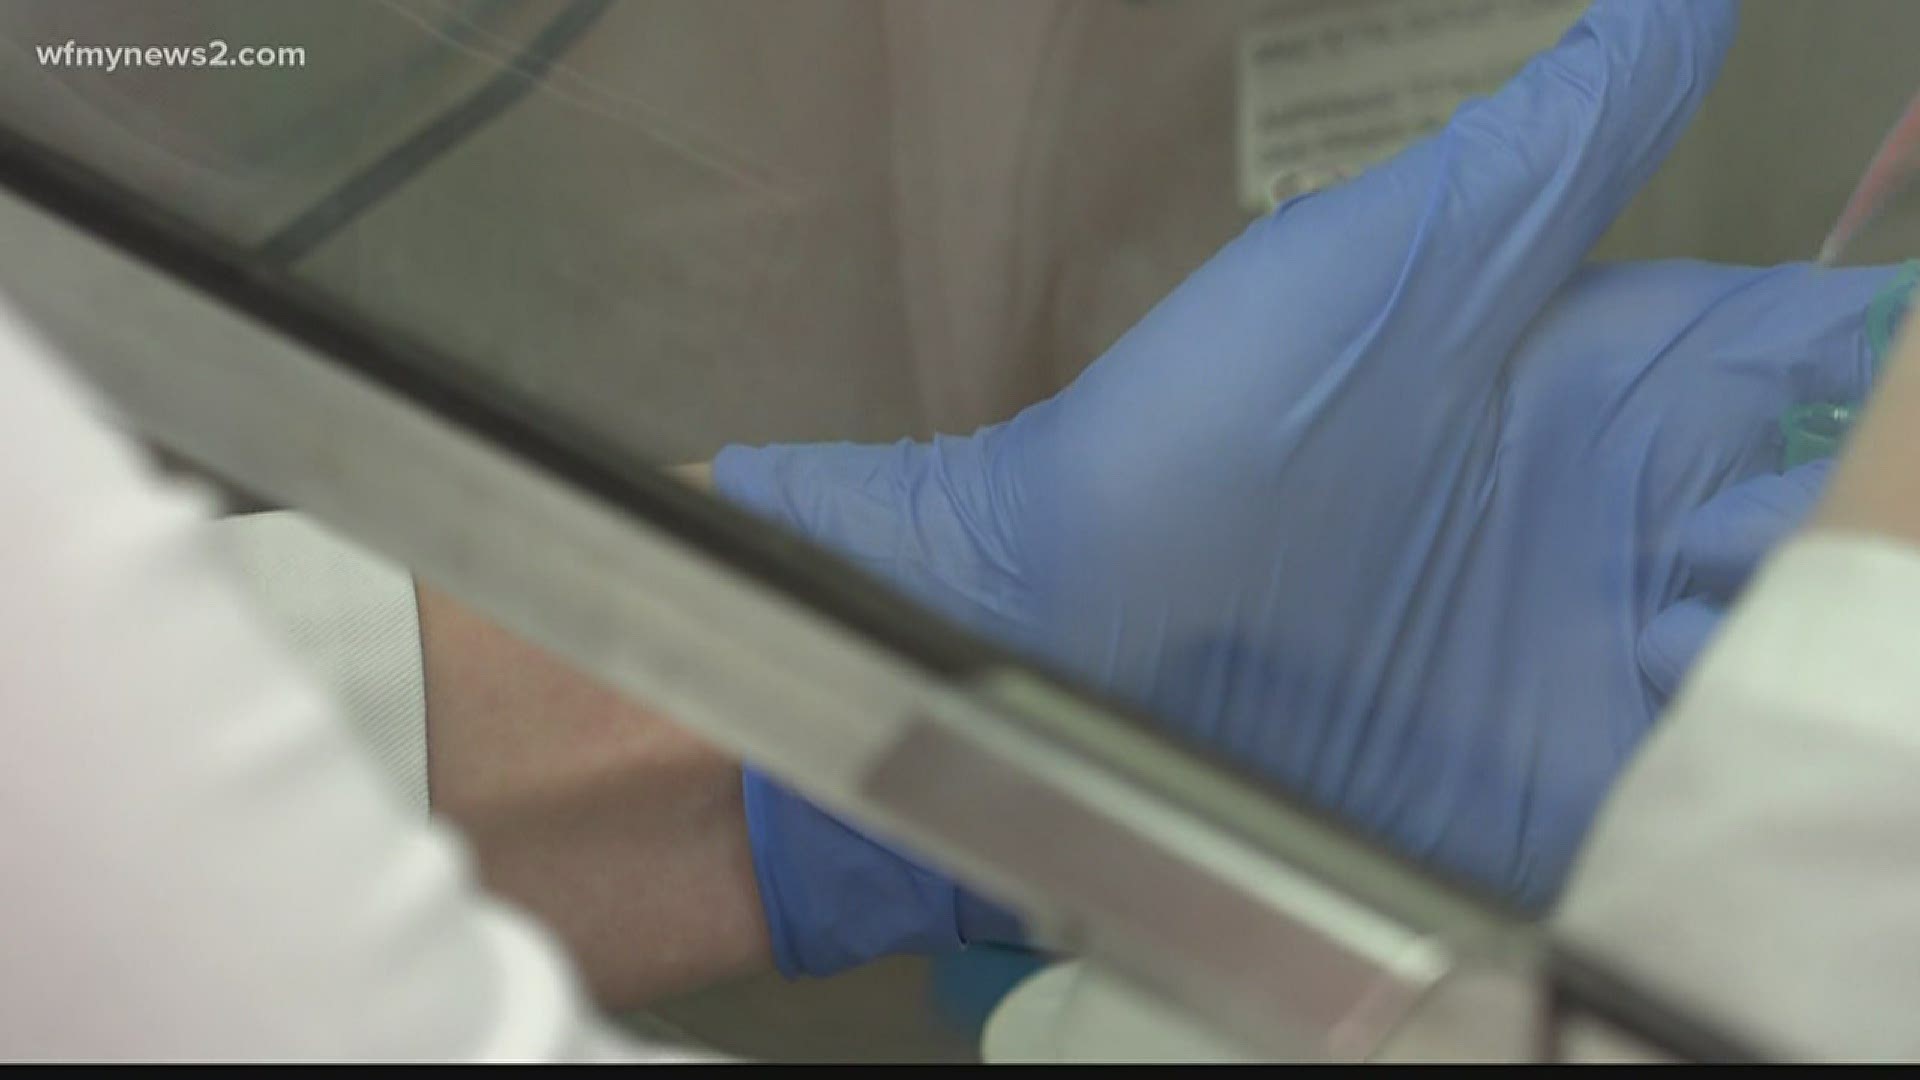 Researchers at WFU Baptist Health in Winston-Salem want to find out just how many people are affected by the coronavirus. It relies on volunteers sending in samples.